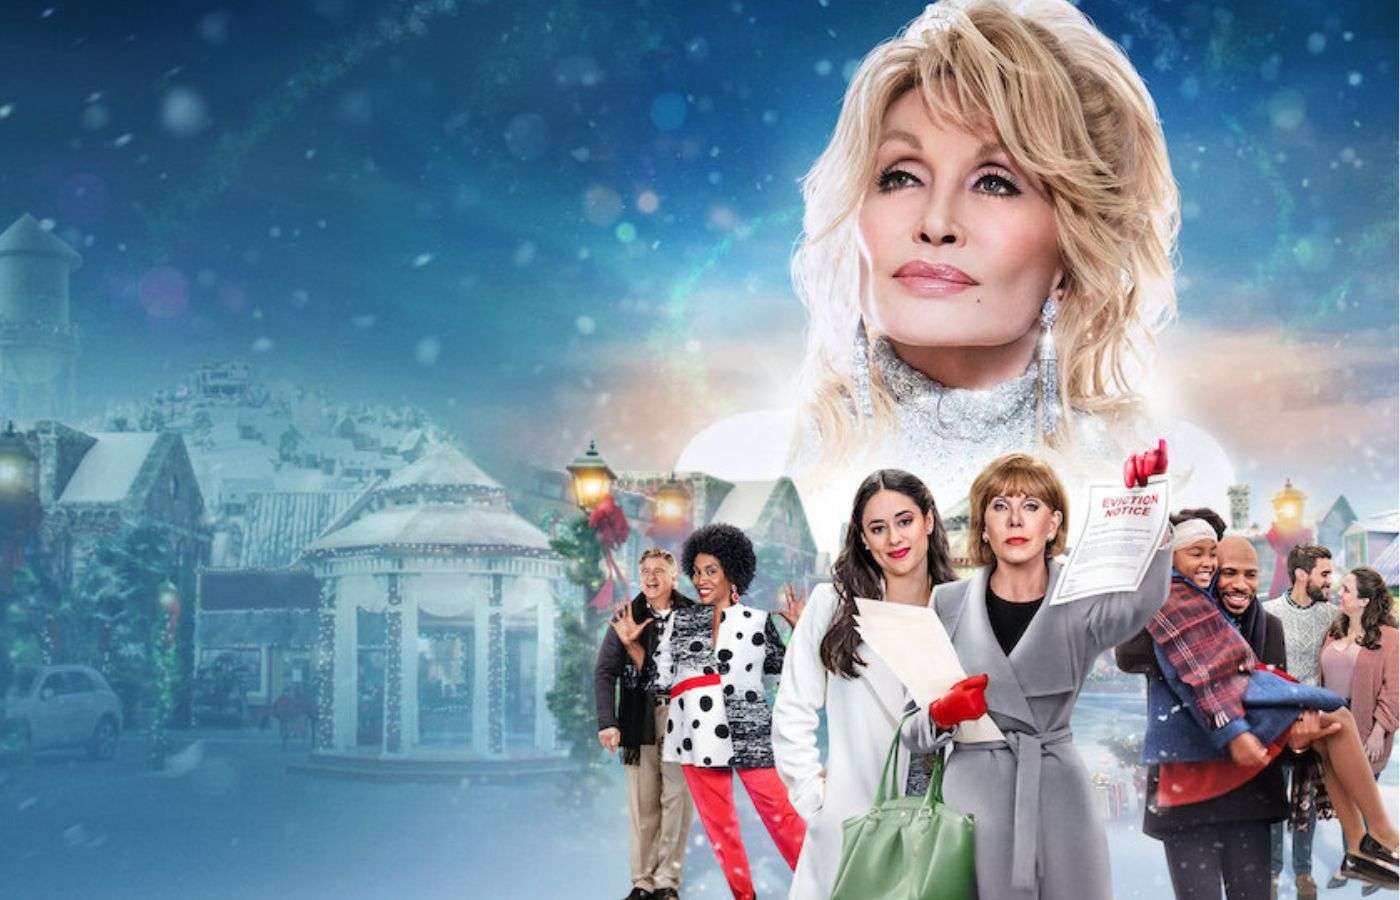 Dolly Parton and cast in one of her Christmas movies